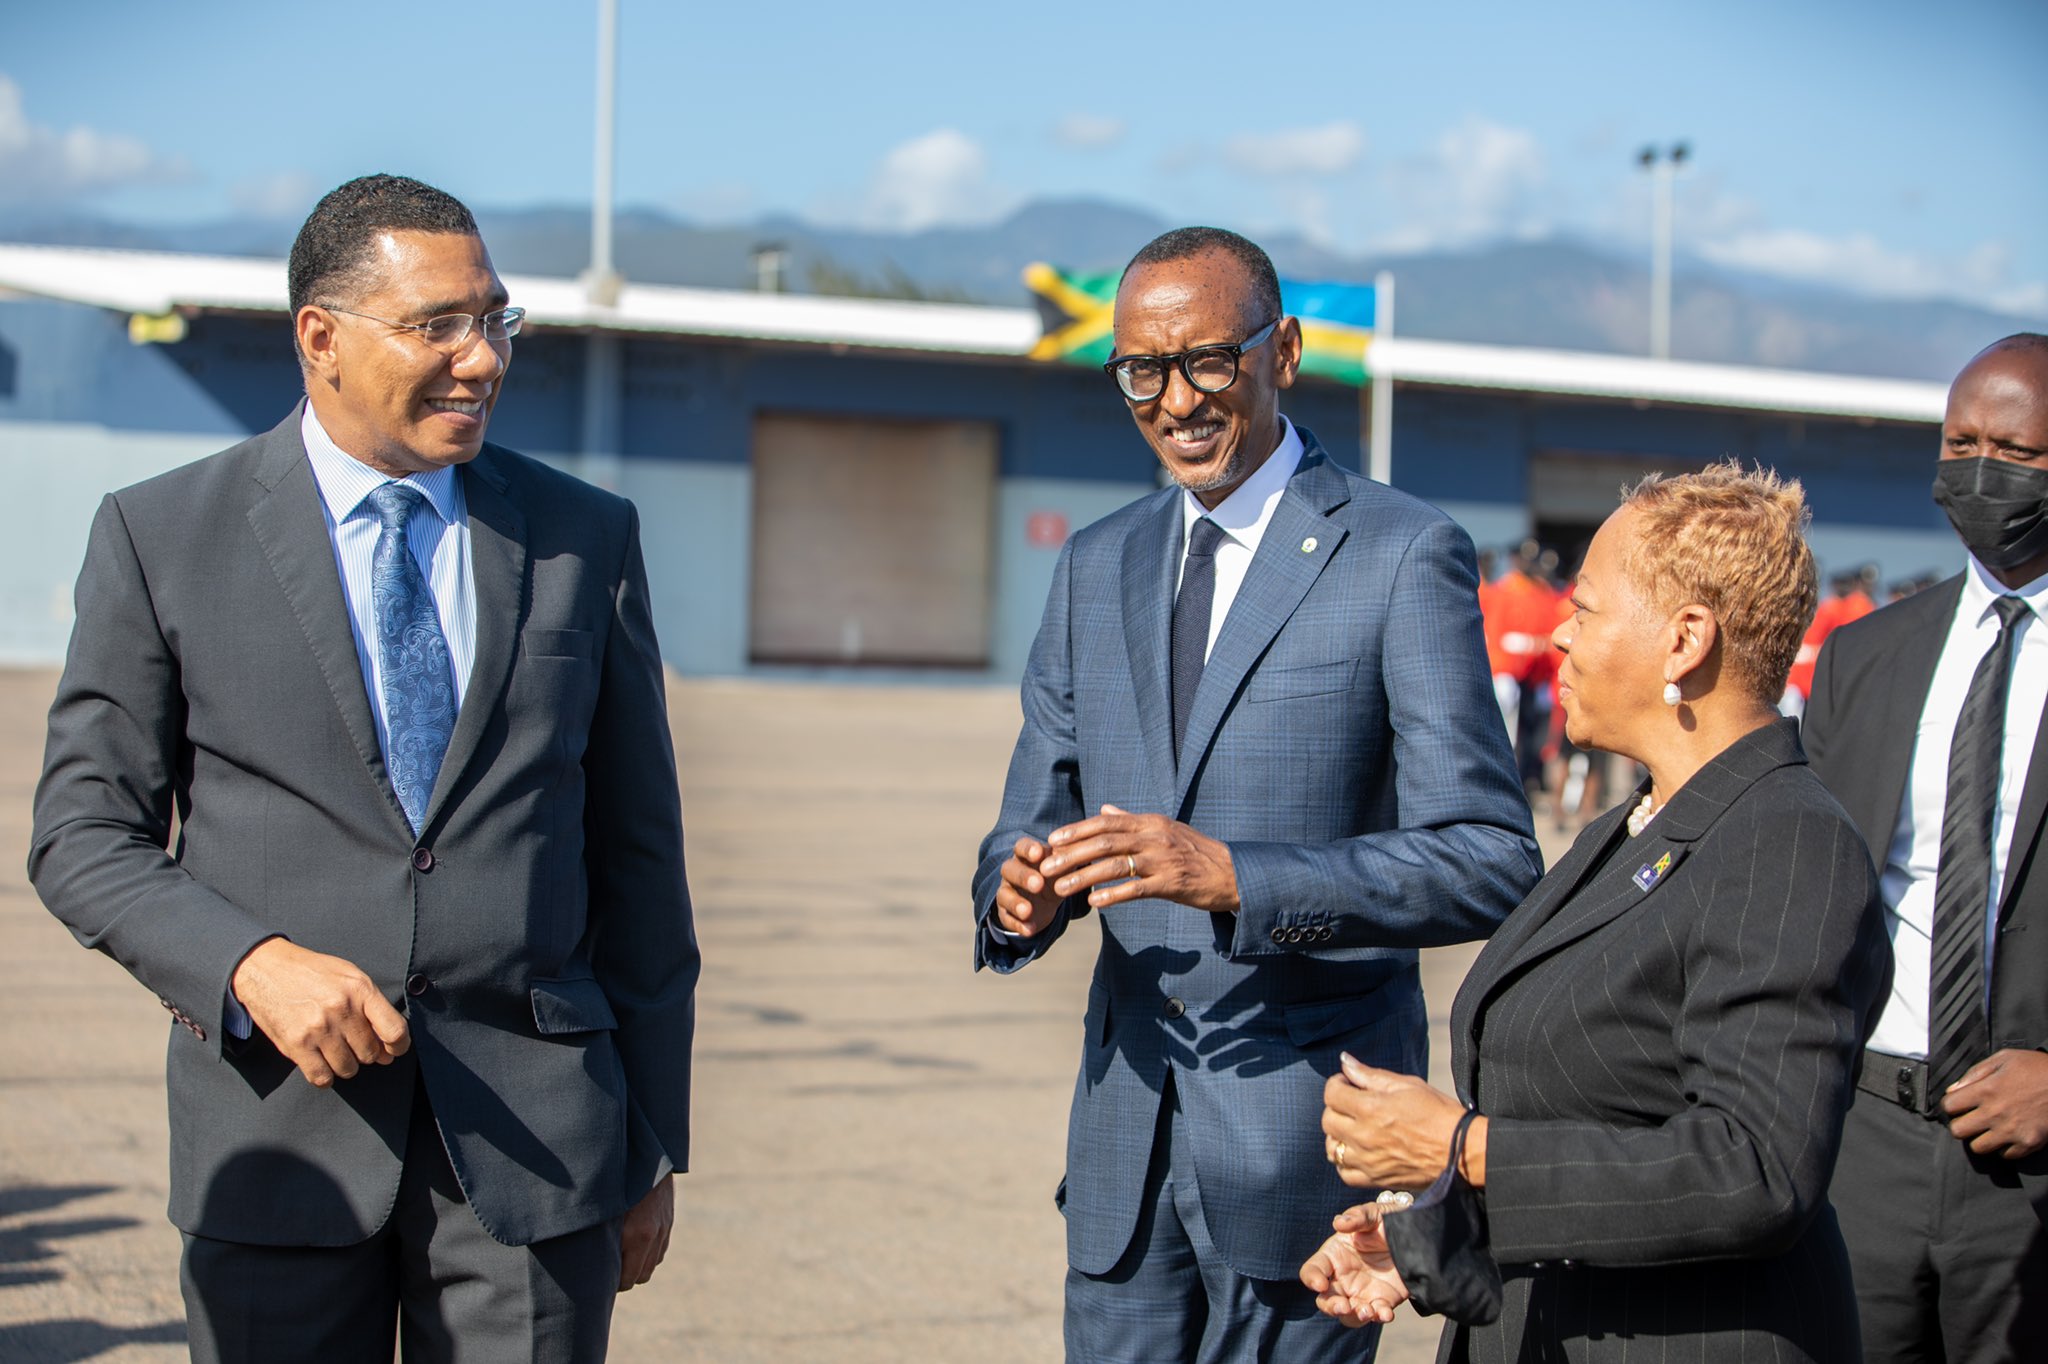 President Kagame in Kingston, Jamaica for his first visit where he was welcomed by Governor General Sir Patrick Allen and Prime Minister Andrew Holness.